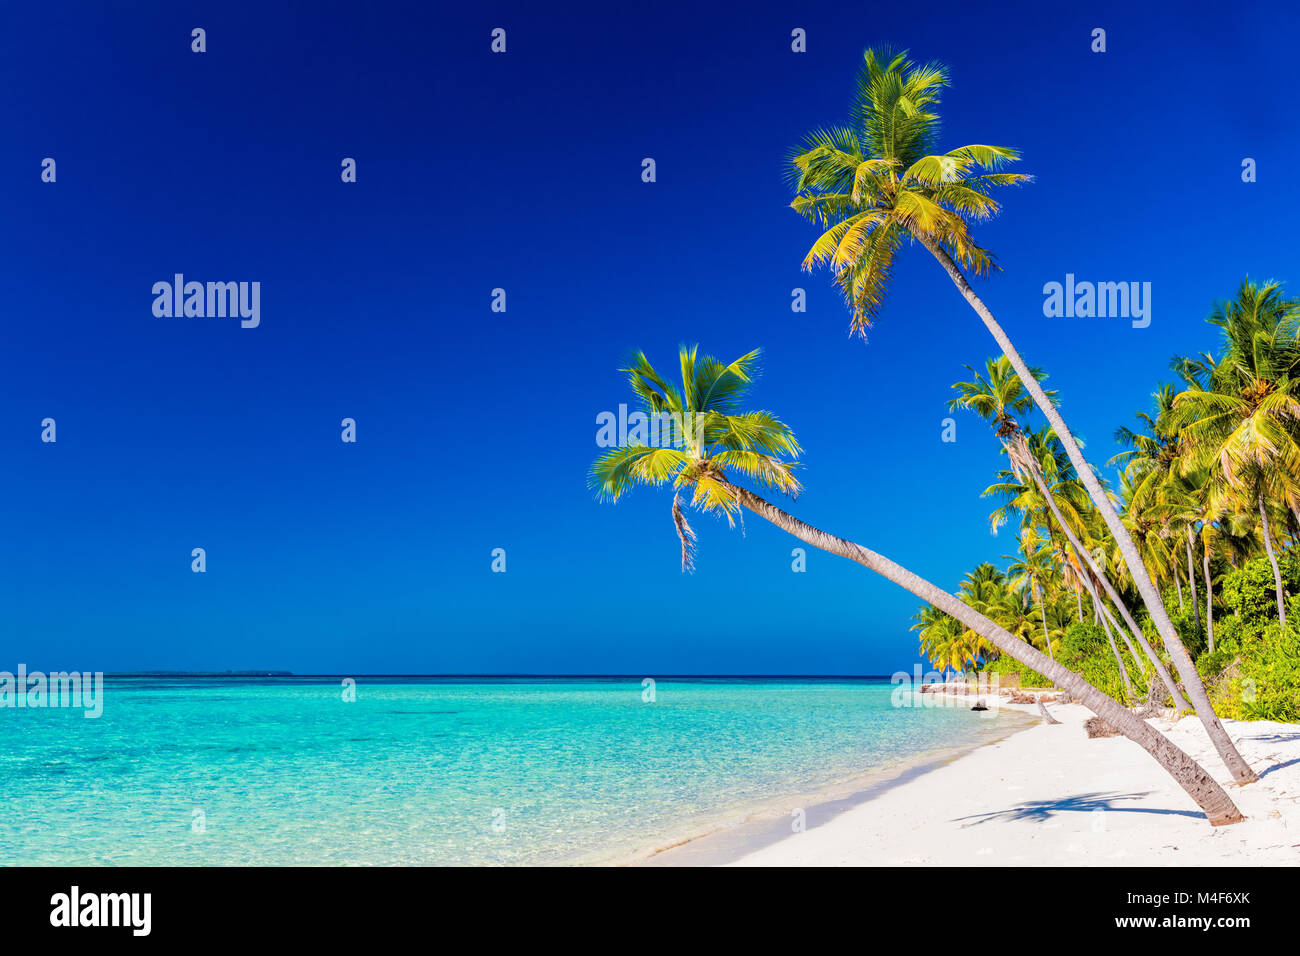 Tropical island with coconut palm trees on sandy beach. Maldives Stock Photo